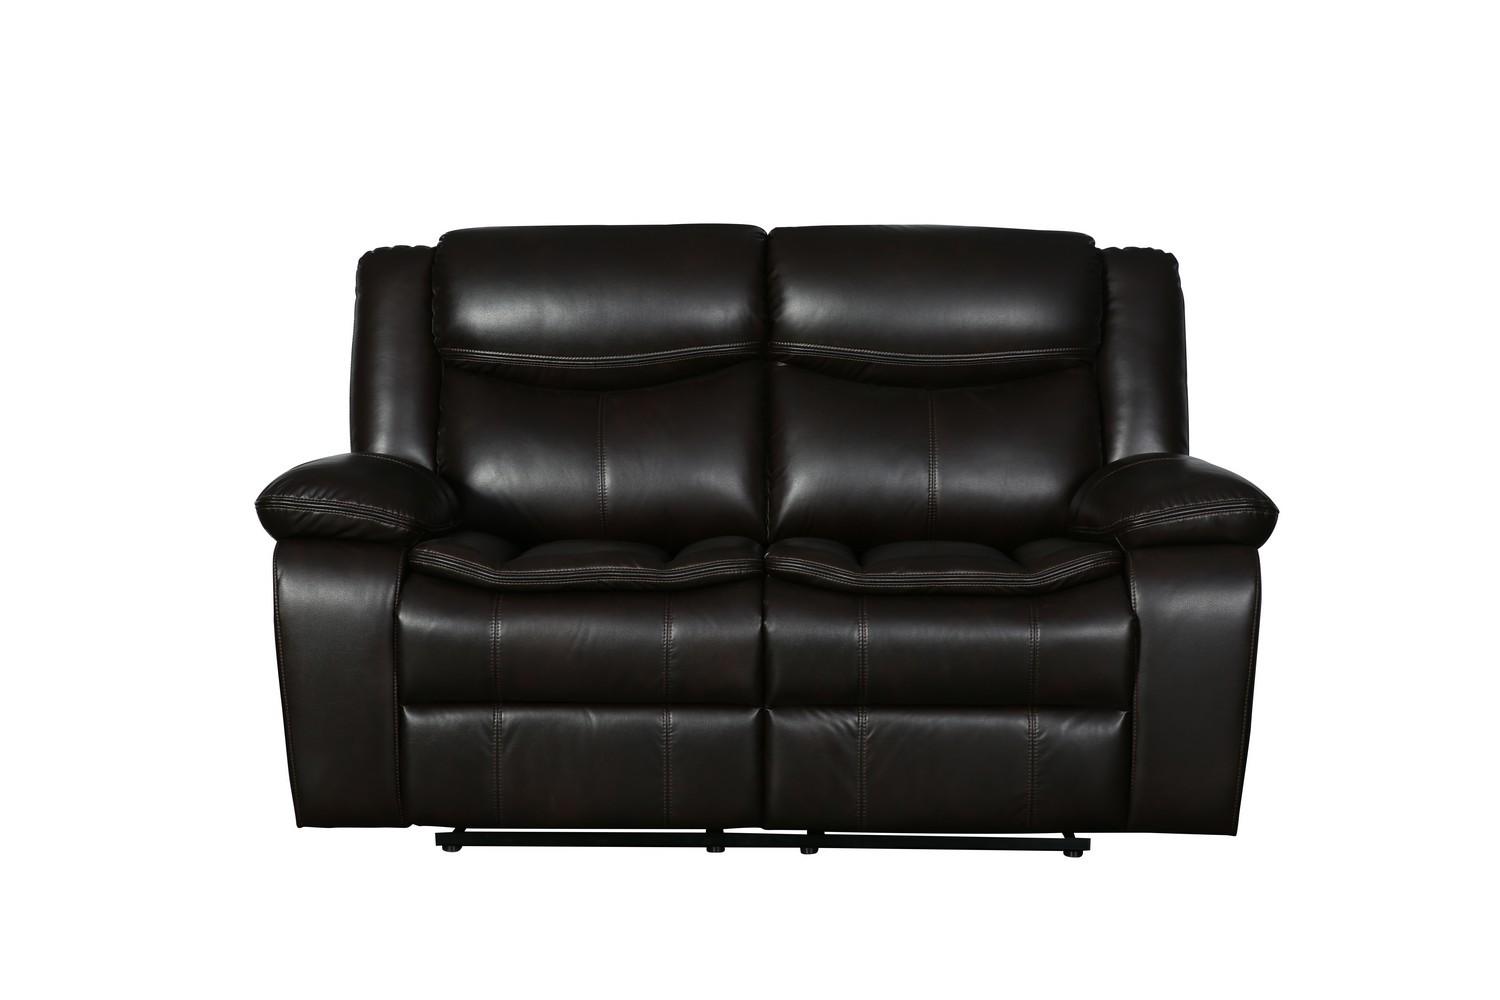 Contemporary Reclining Loveseat 6967 Reclining Loveseat 6967-BROWN-L 6967-BROWN-L in Brown leather Air